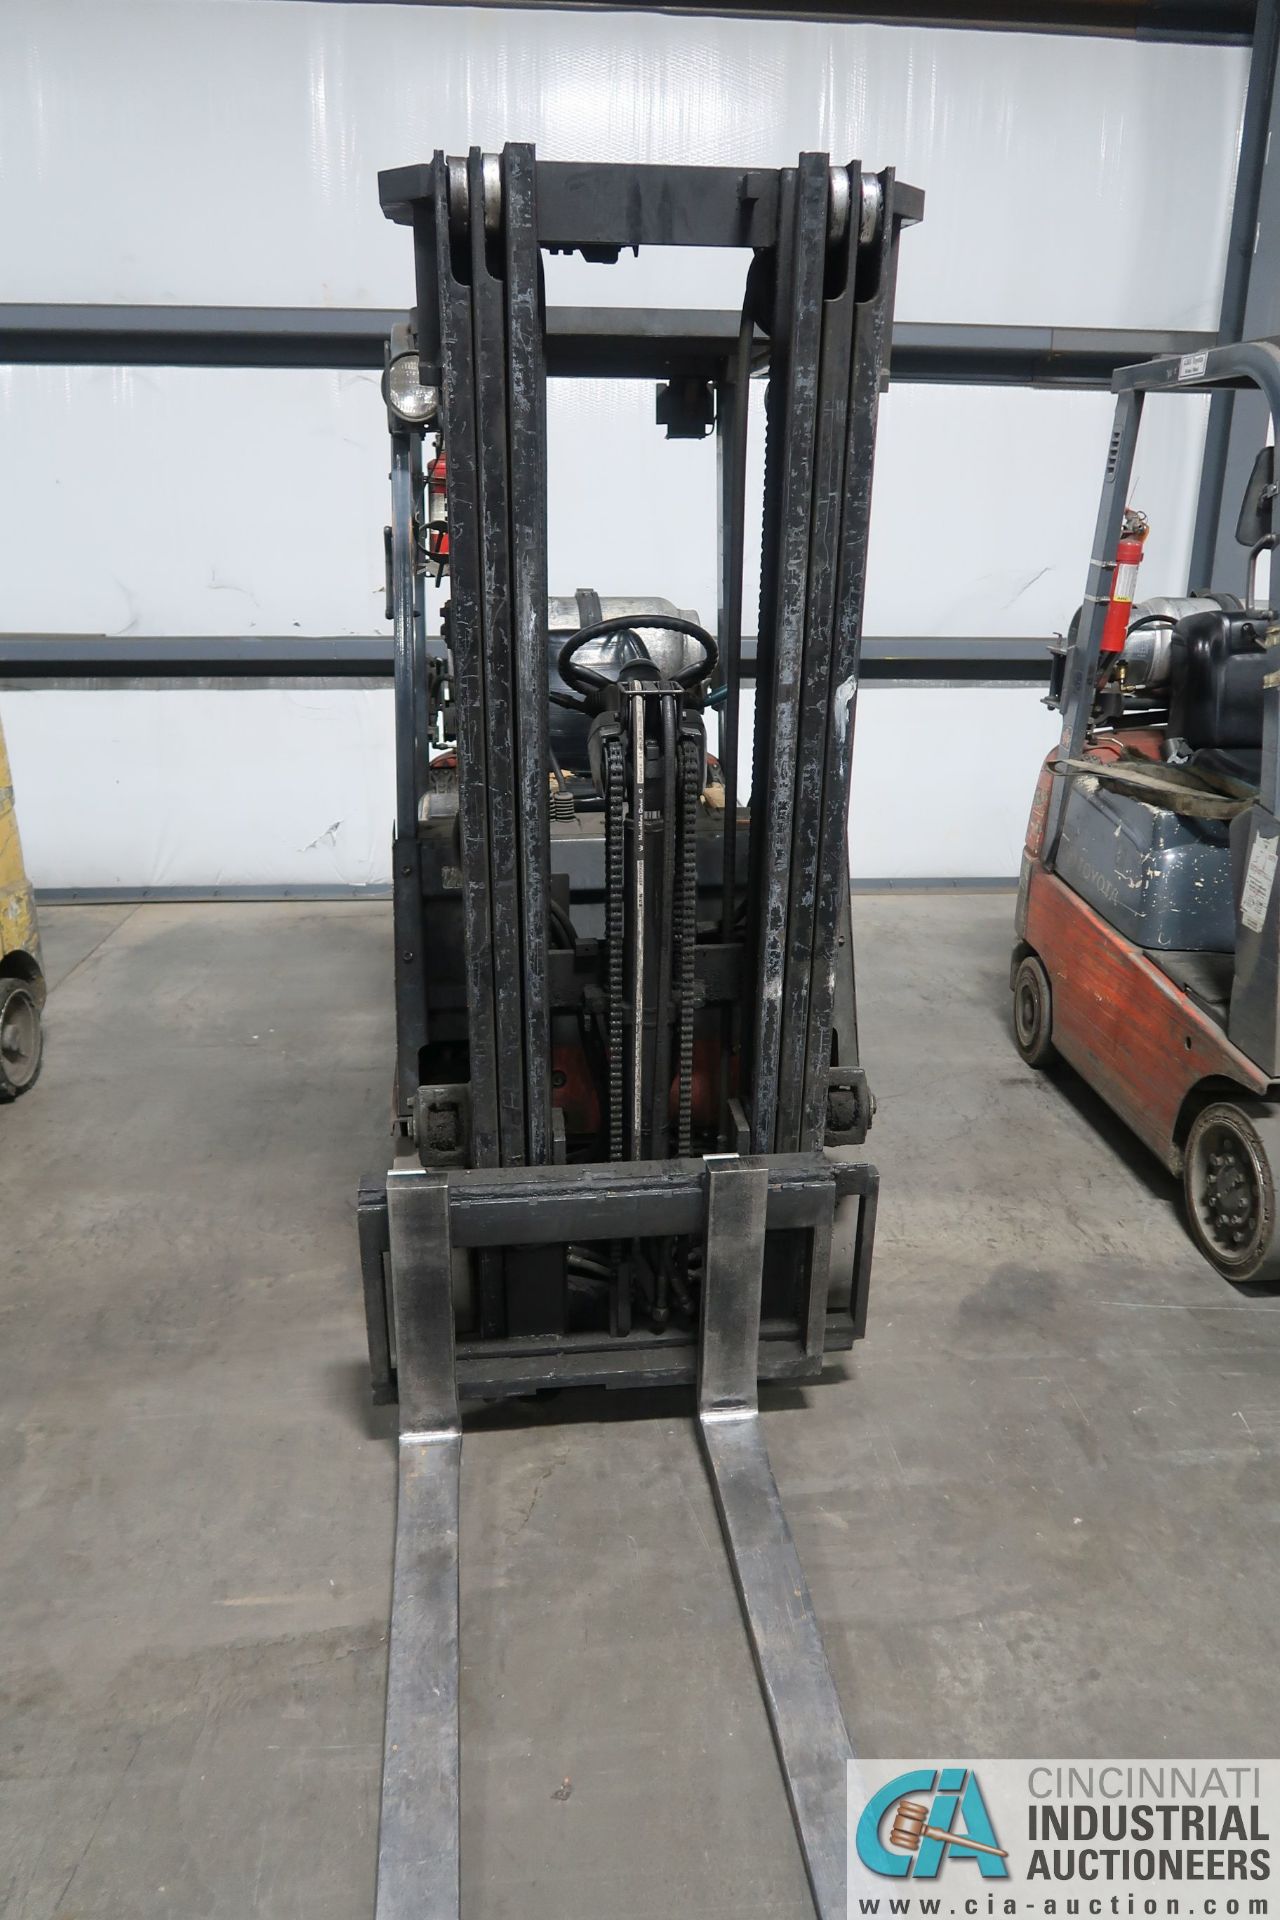 3,000 LB. TOYOTA MODLE 7FGU15 SOLID TIRE LP GAS LIFT TRUCK; S/N 60891, 3-STAGE MAST, 82" MAST - Image 5 of 7